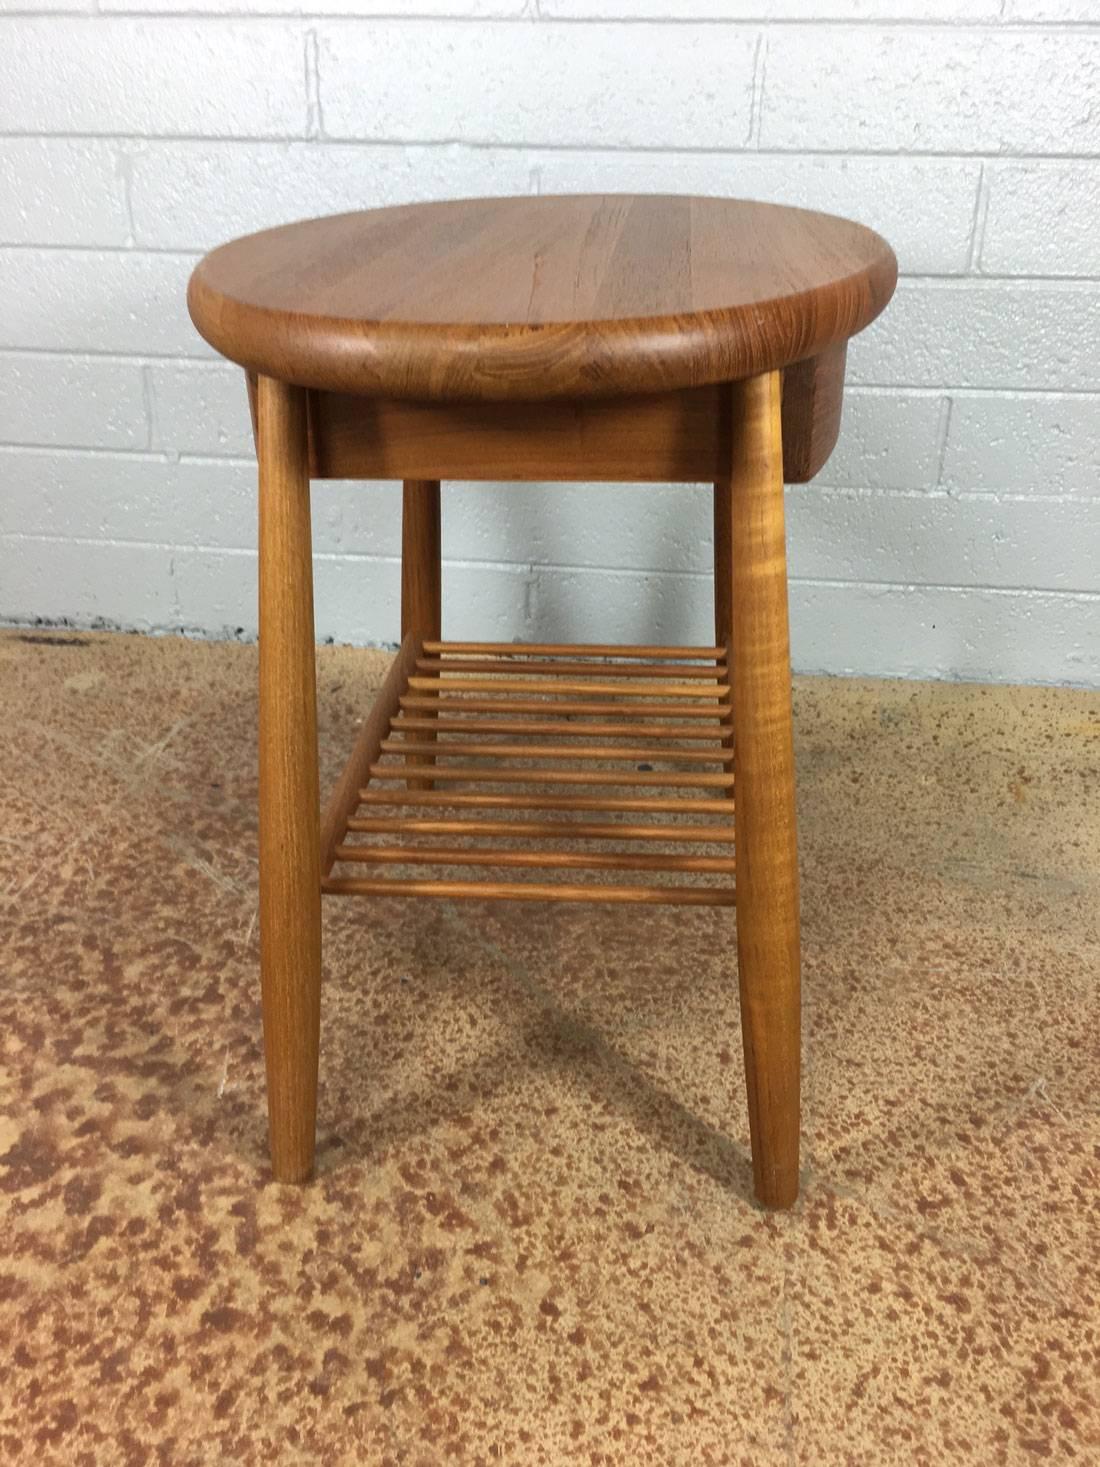 Mid-Century Modern Solid Teak Side Table with Drawer and Magazine Shelf